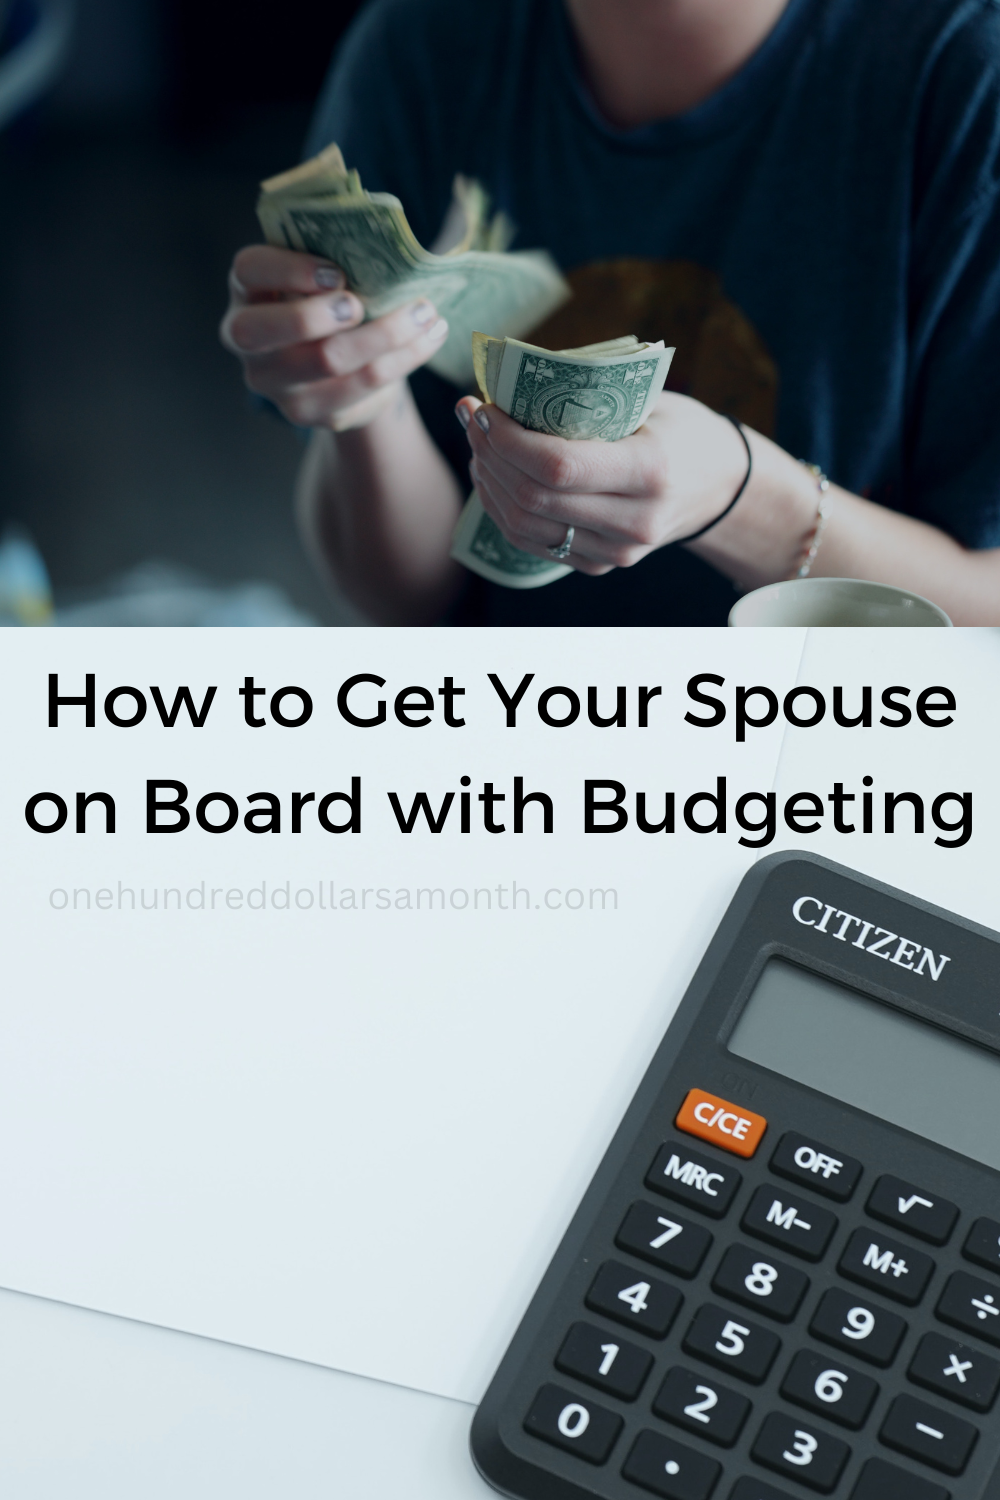 How to Get Your Spouse on Board with Budgeting